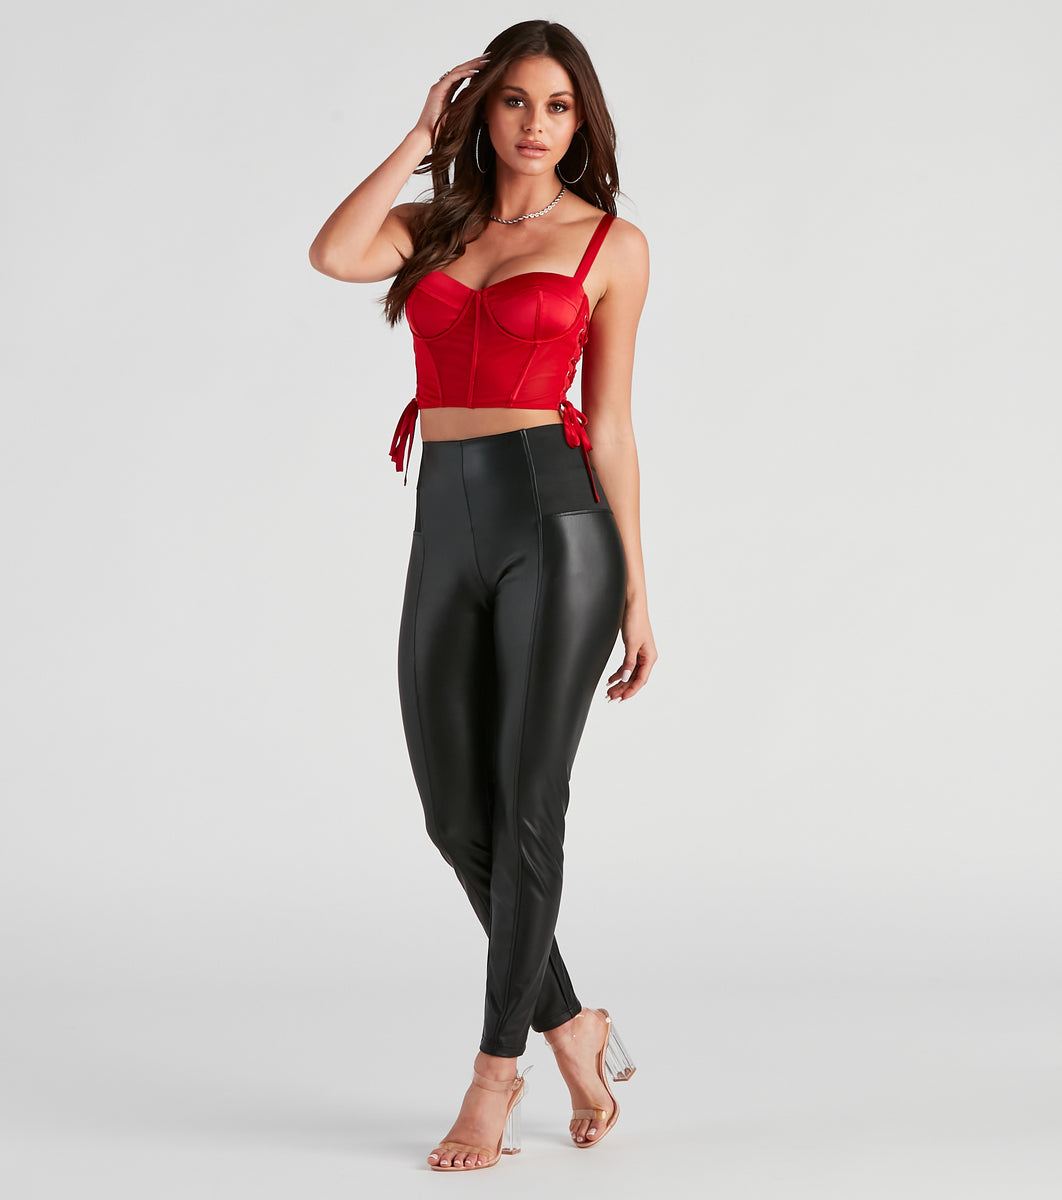 Id Ideology Big Girl Core Stretch Leggings, Created for Macy's